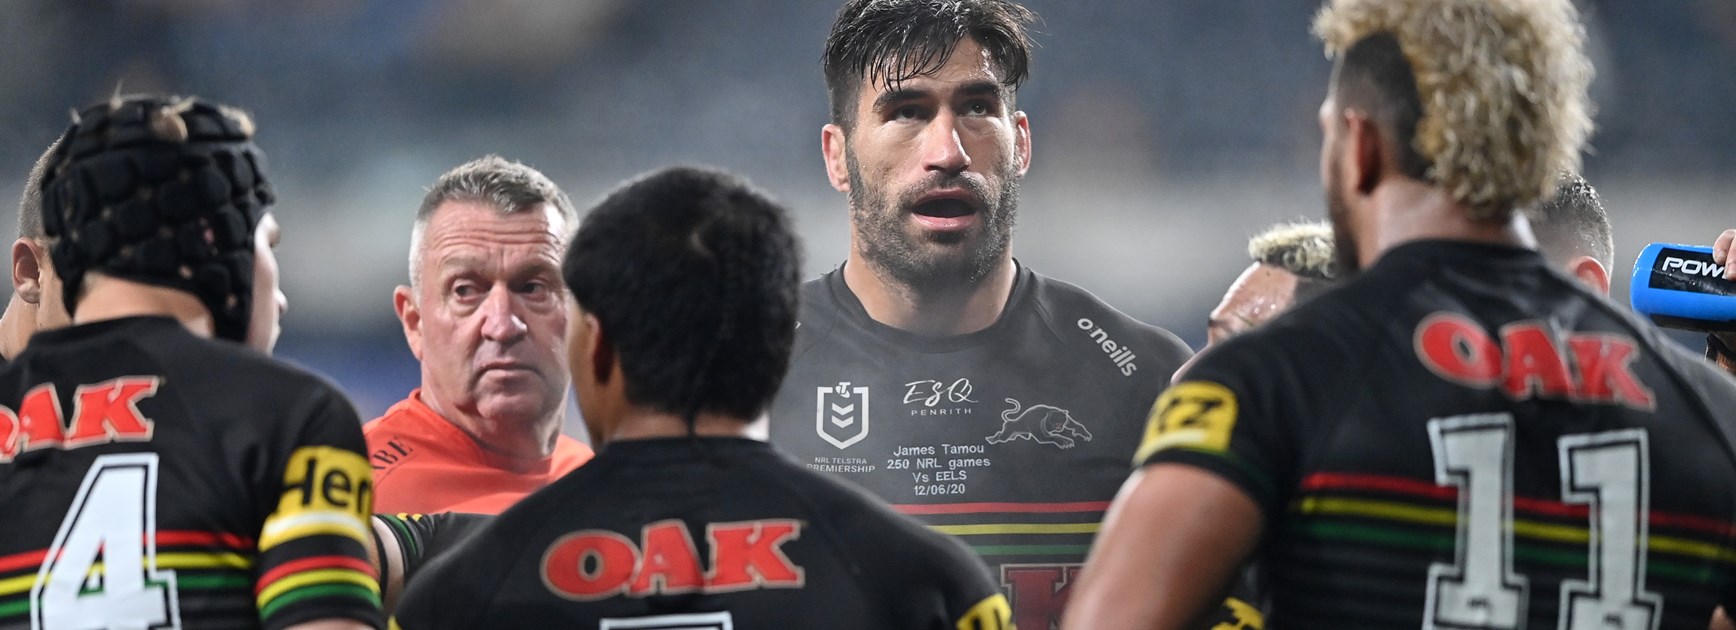 James Tamou and the Panthers.